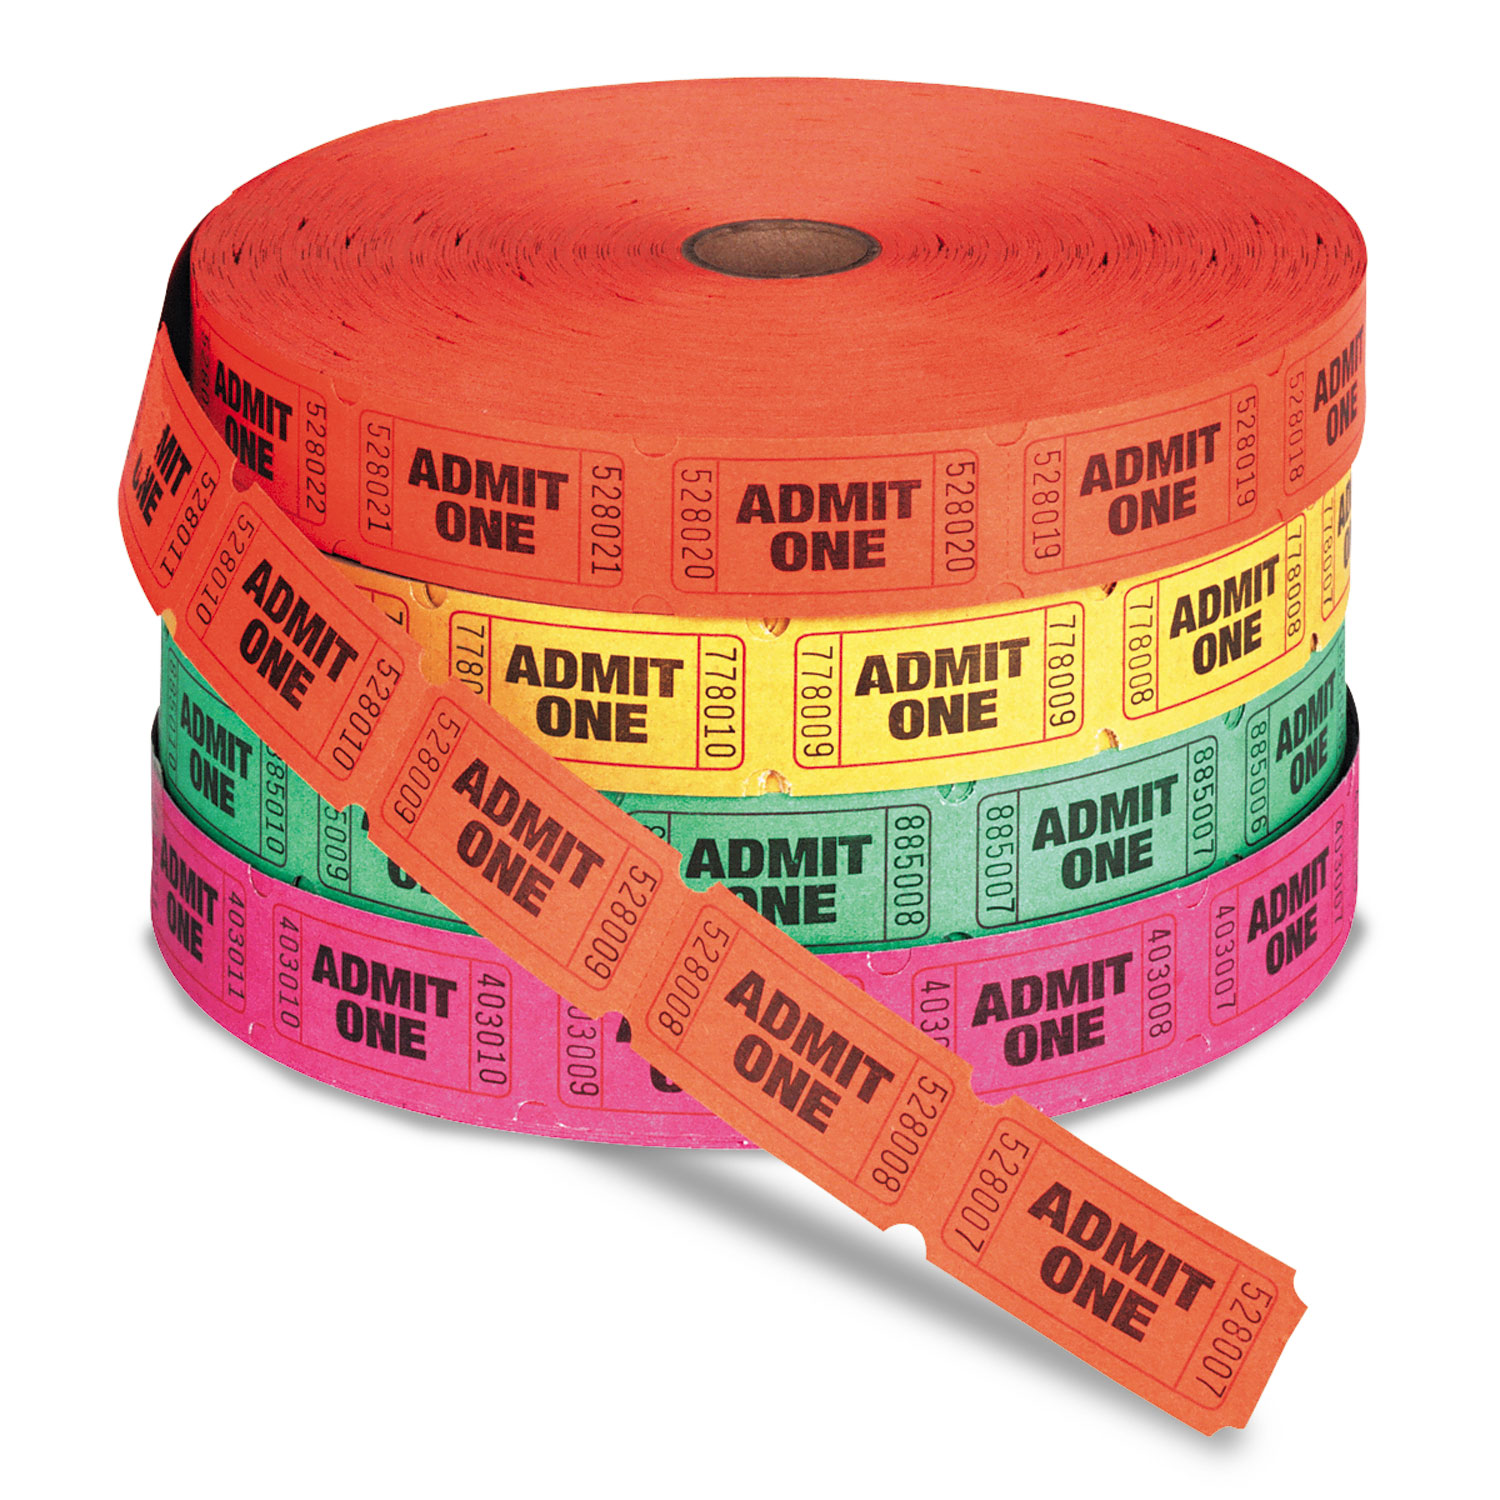 Admit One Tickets Red Colour 1000 Tickets